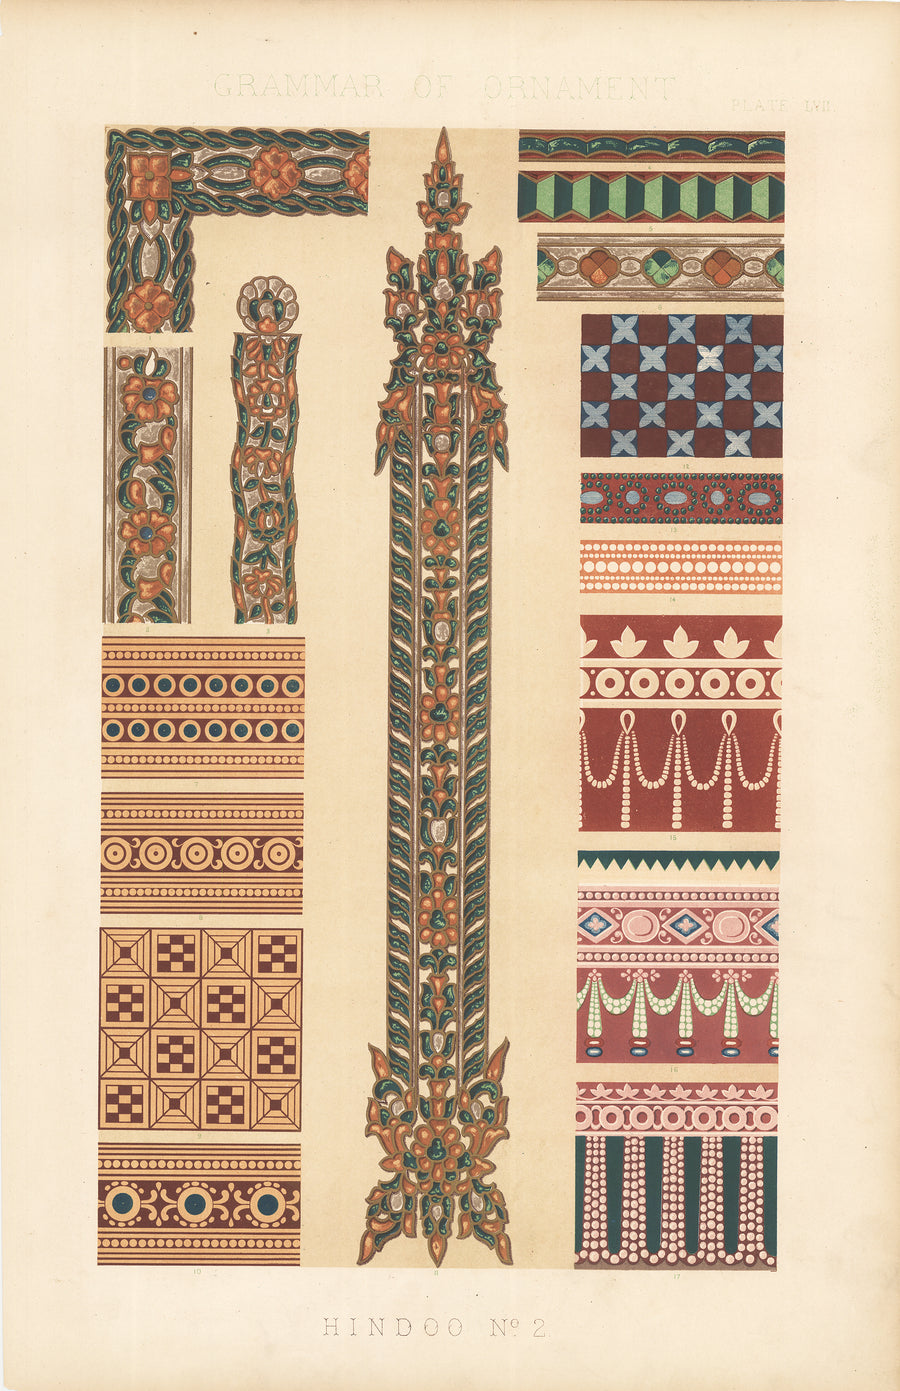 Antique Lithograph Print: Grammar of Ornament by Owen Jones, 1st edition 1856 - Hindoo No.2, Plate LVII 